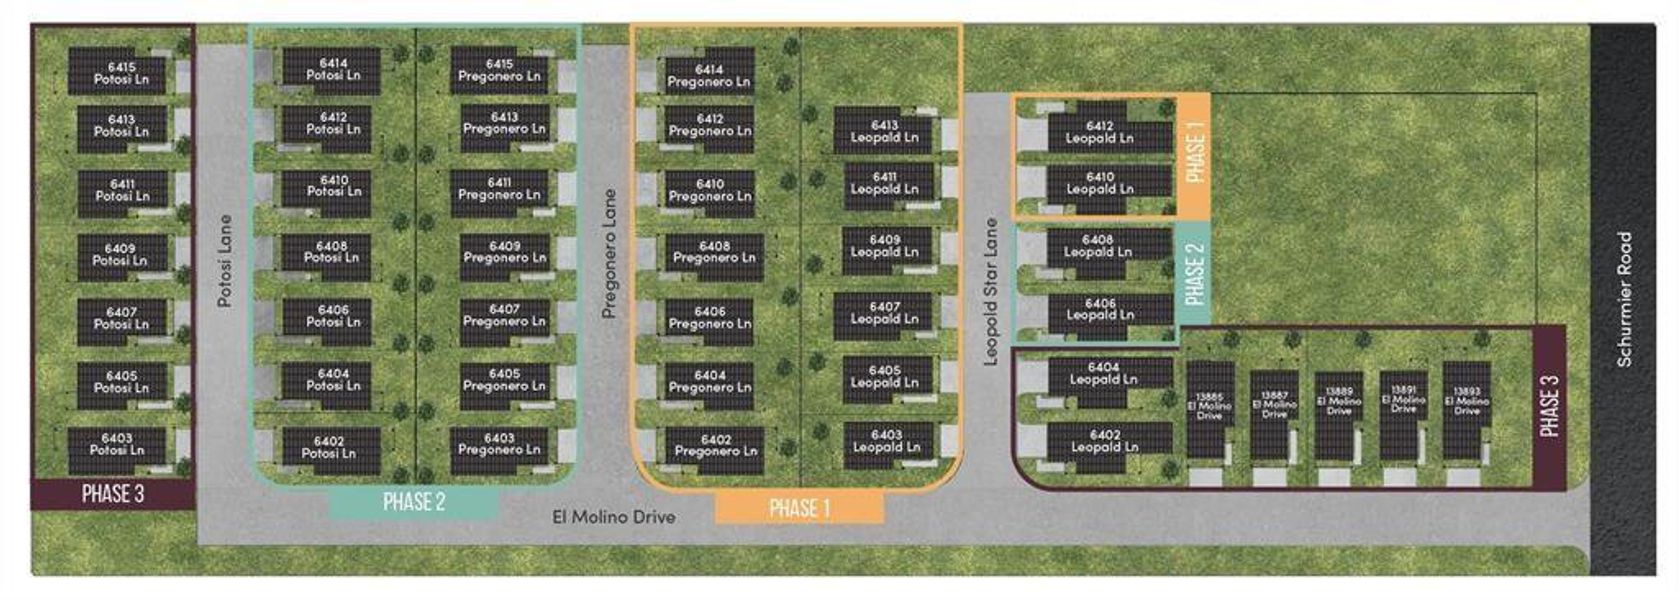 The 'Thomas Homes' site plan. This grand development offers 45 free-standing homes ranging from 1580 to 1971 sqft. With 1st-floor living areas, a double-wide private driveway and sizable yards, Thomas Homes offers a special place to call home.